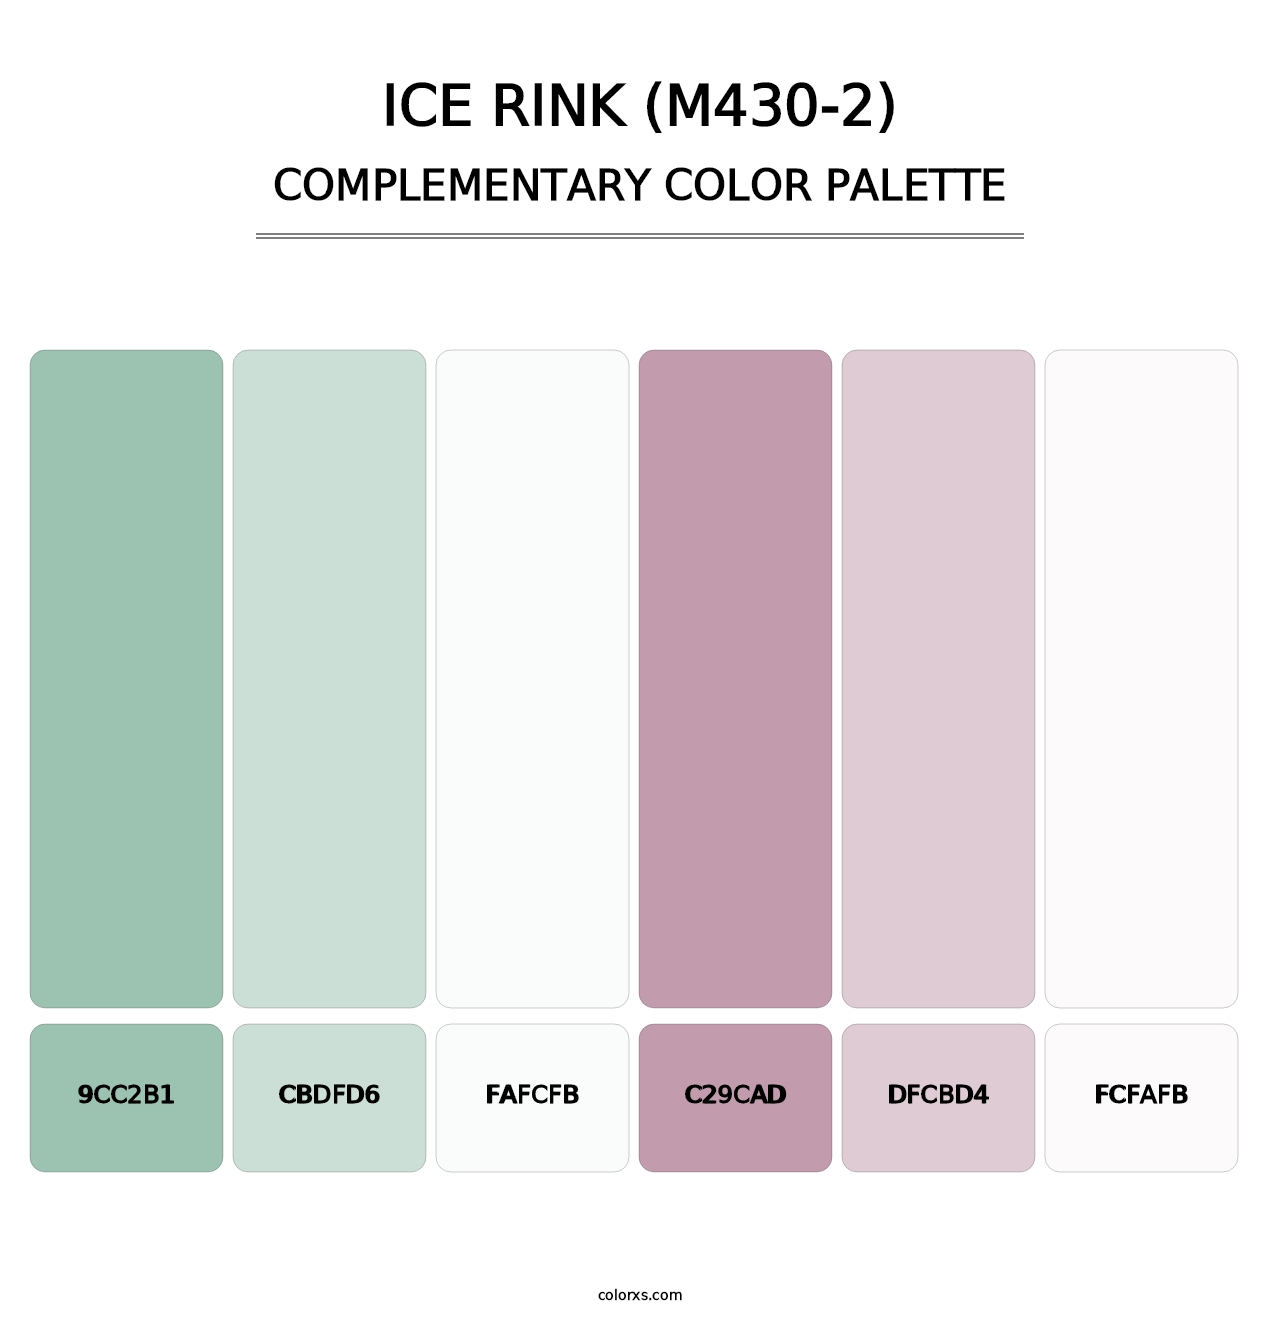 Ice Rink (M430-2) - Complementary Color Palette